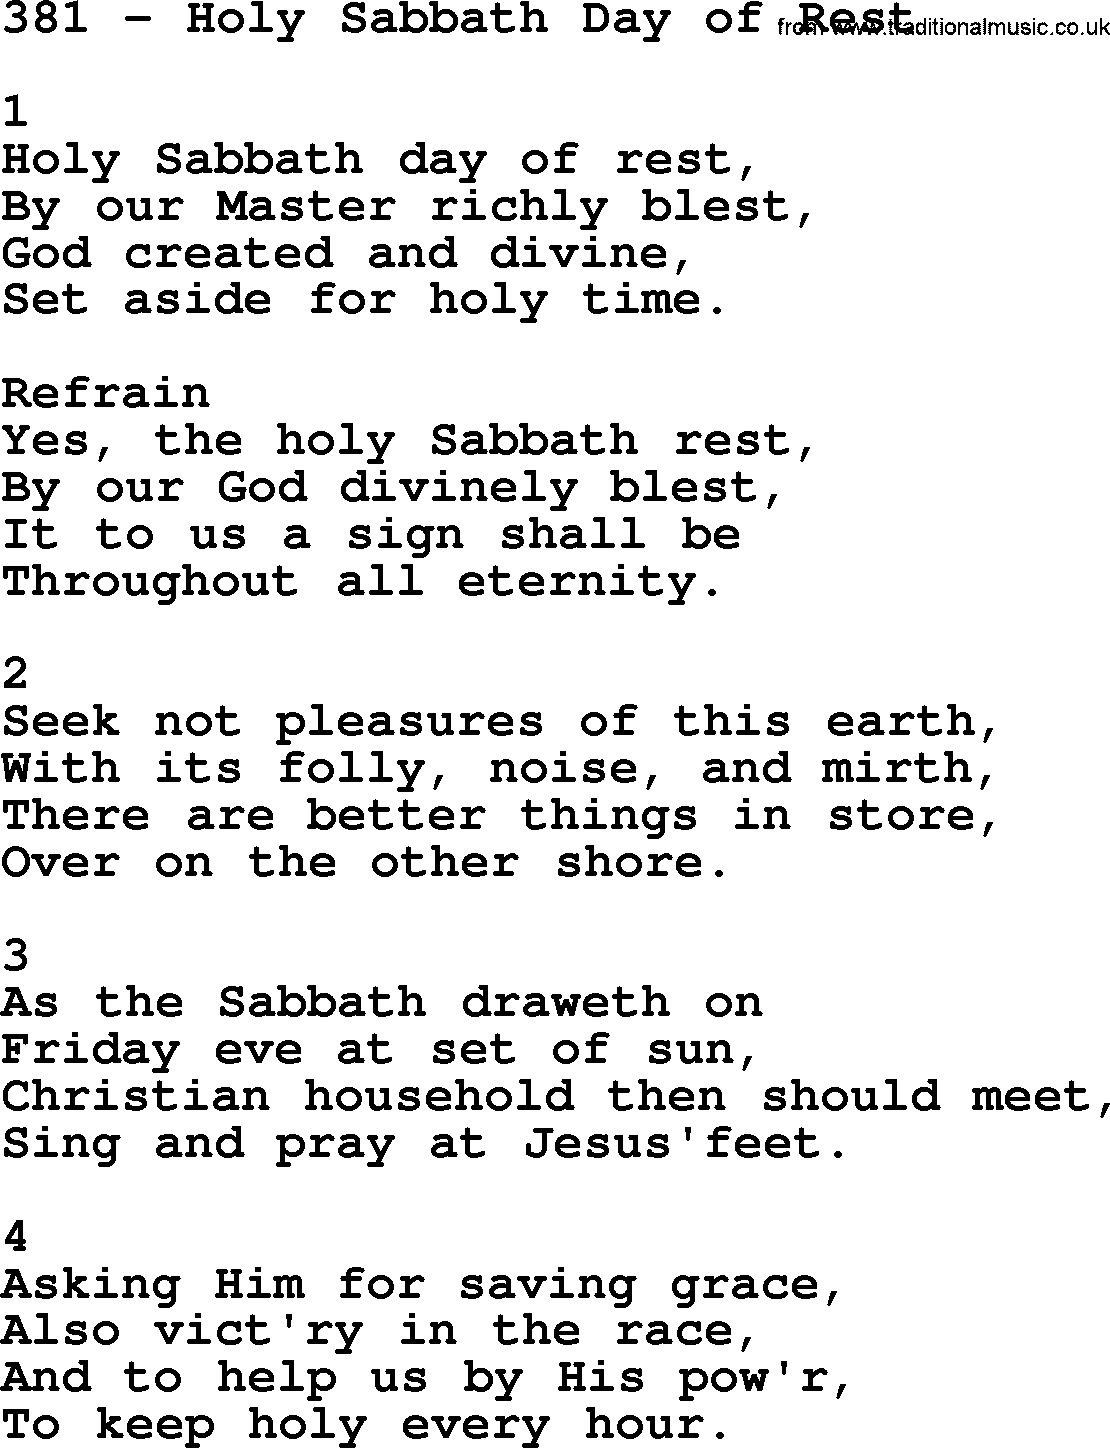 Complete Adventis Hymnal, title: 381-Holy Sabbath Day Of Rest, with lyrics, midi, mp3, powerpoints(PPT) and PDF,